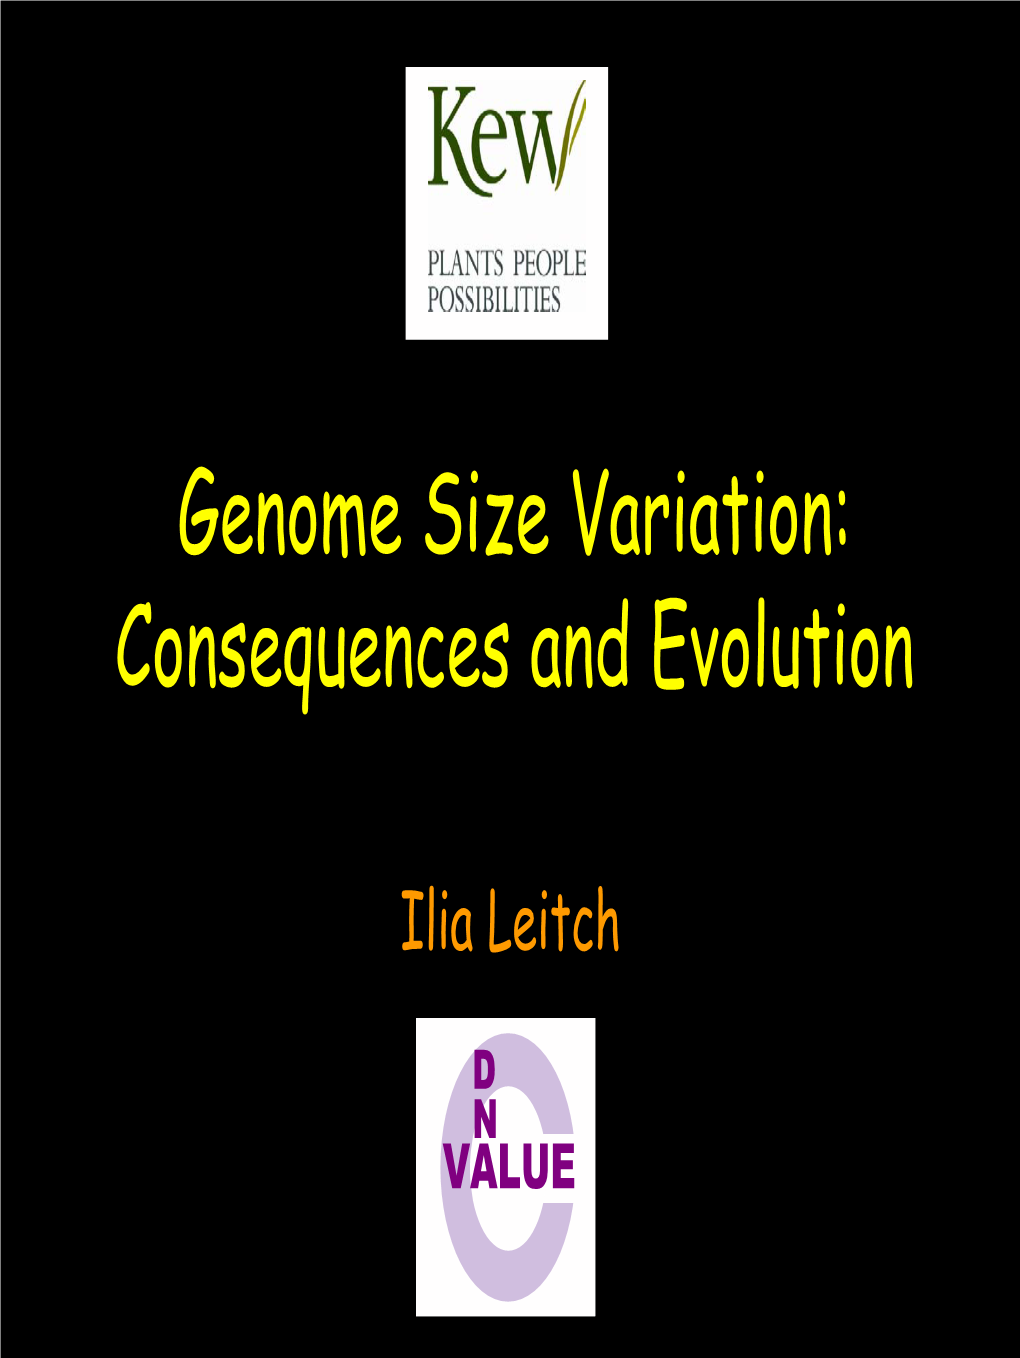 Genome Size Variation: Consequences and Evolution